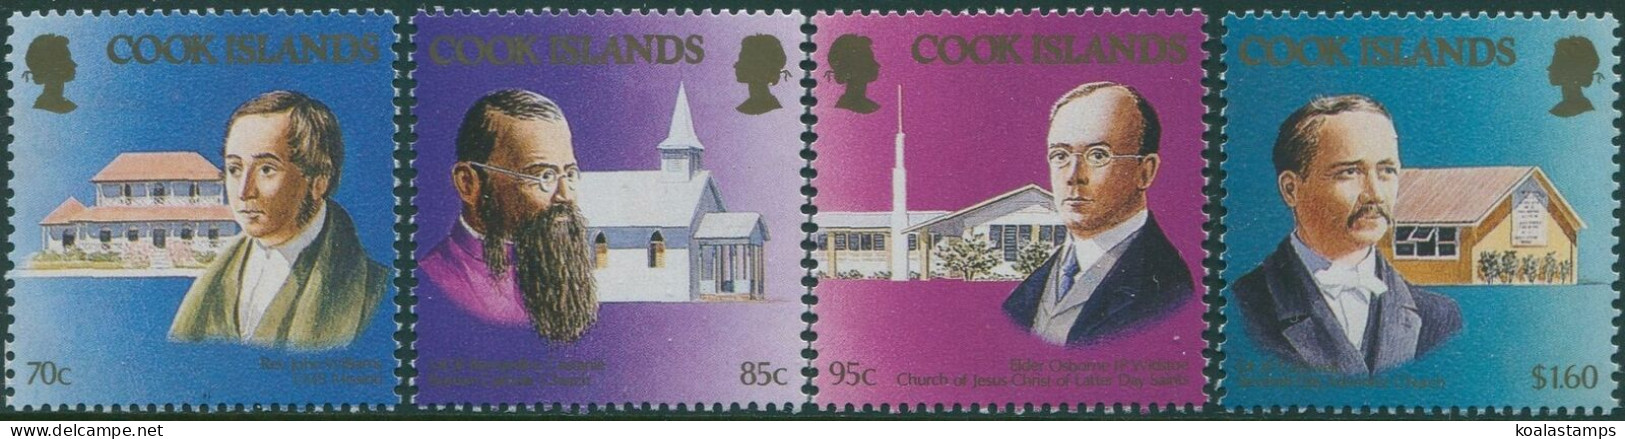 Cook Islands 1990 SG1232-1235 Christianity Set MNH - Cookinseln